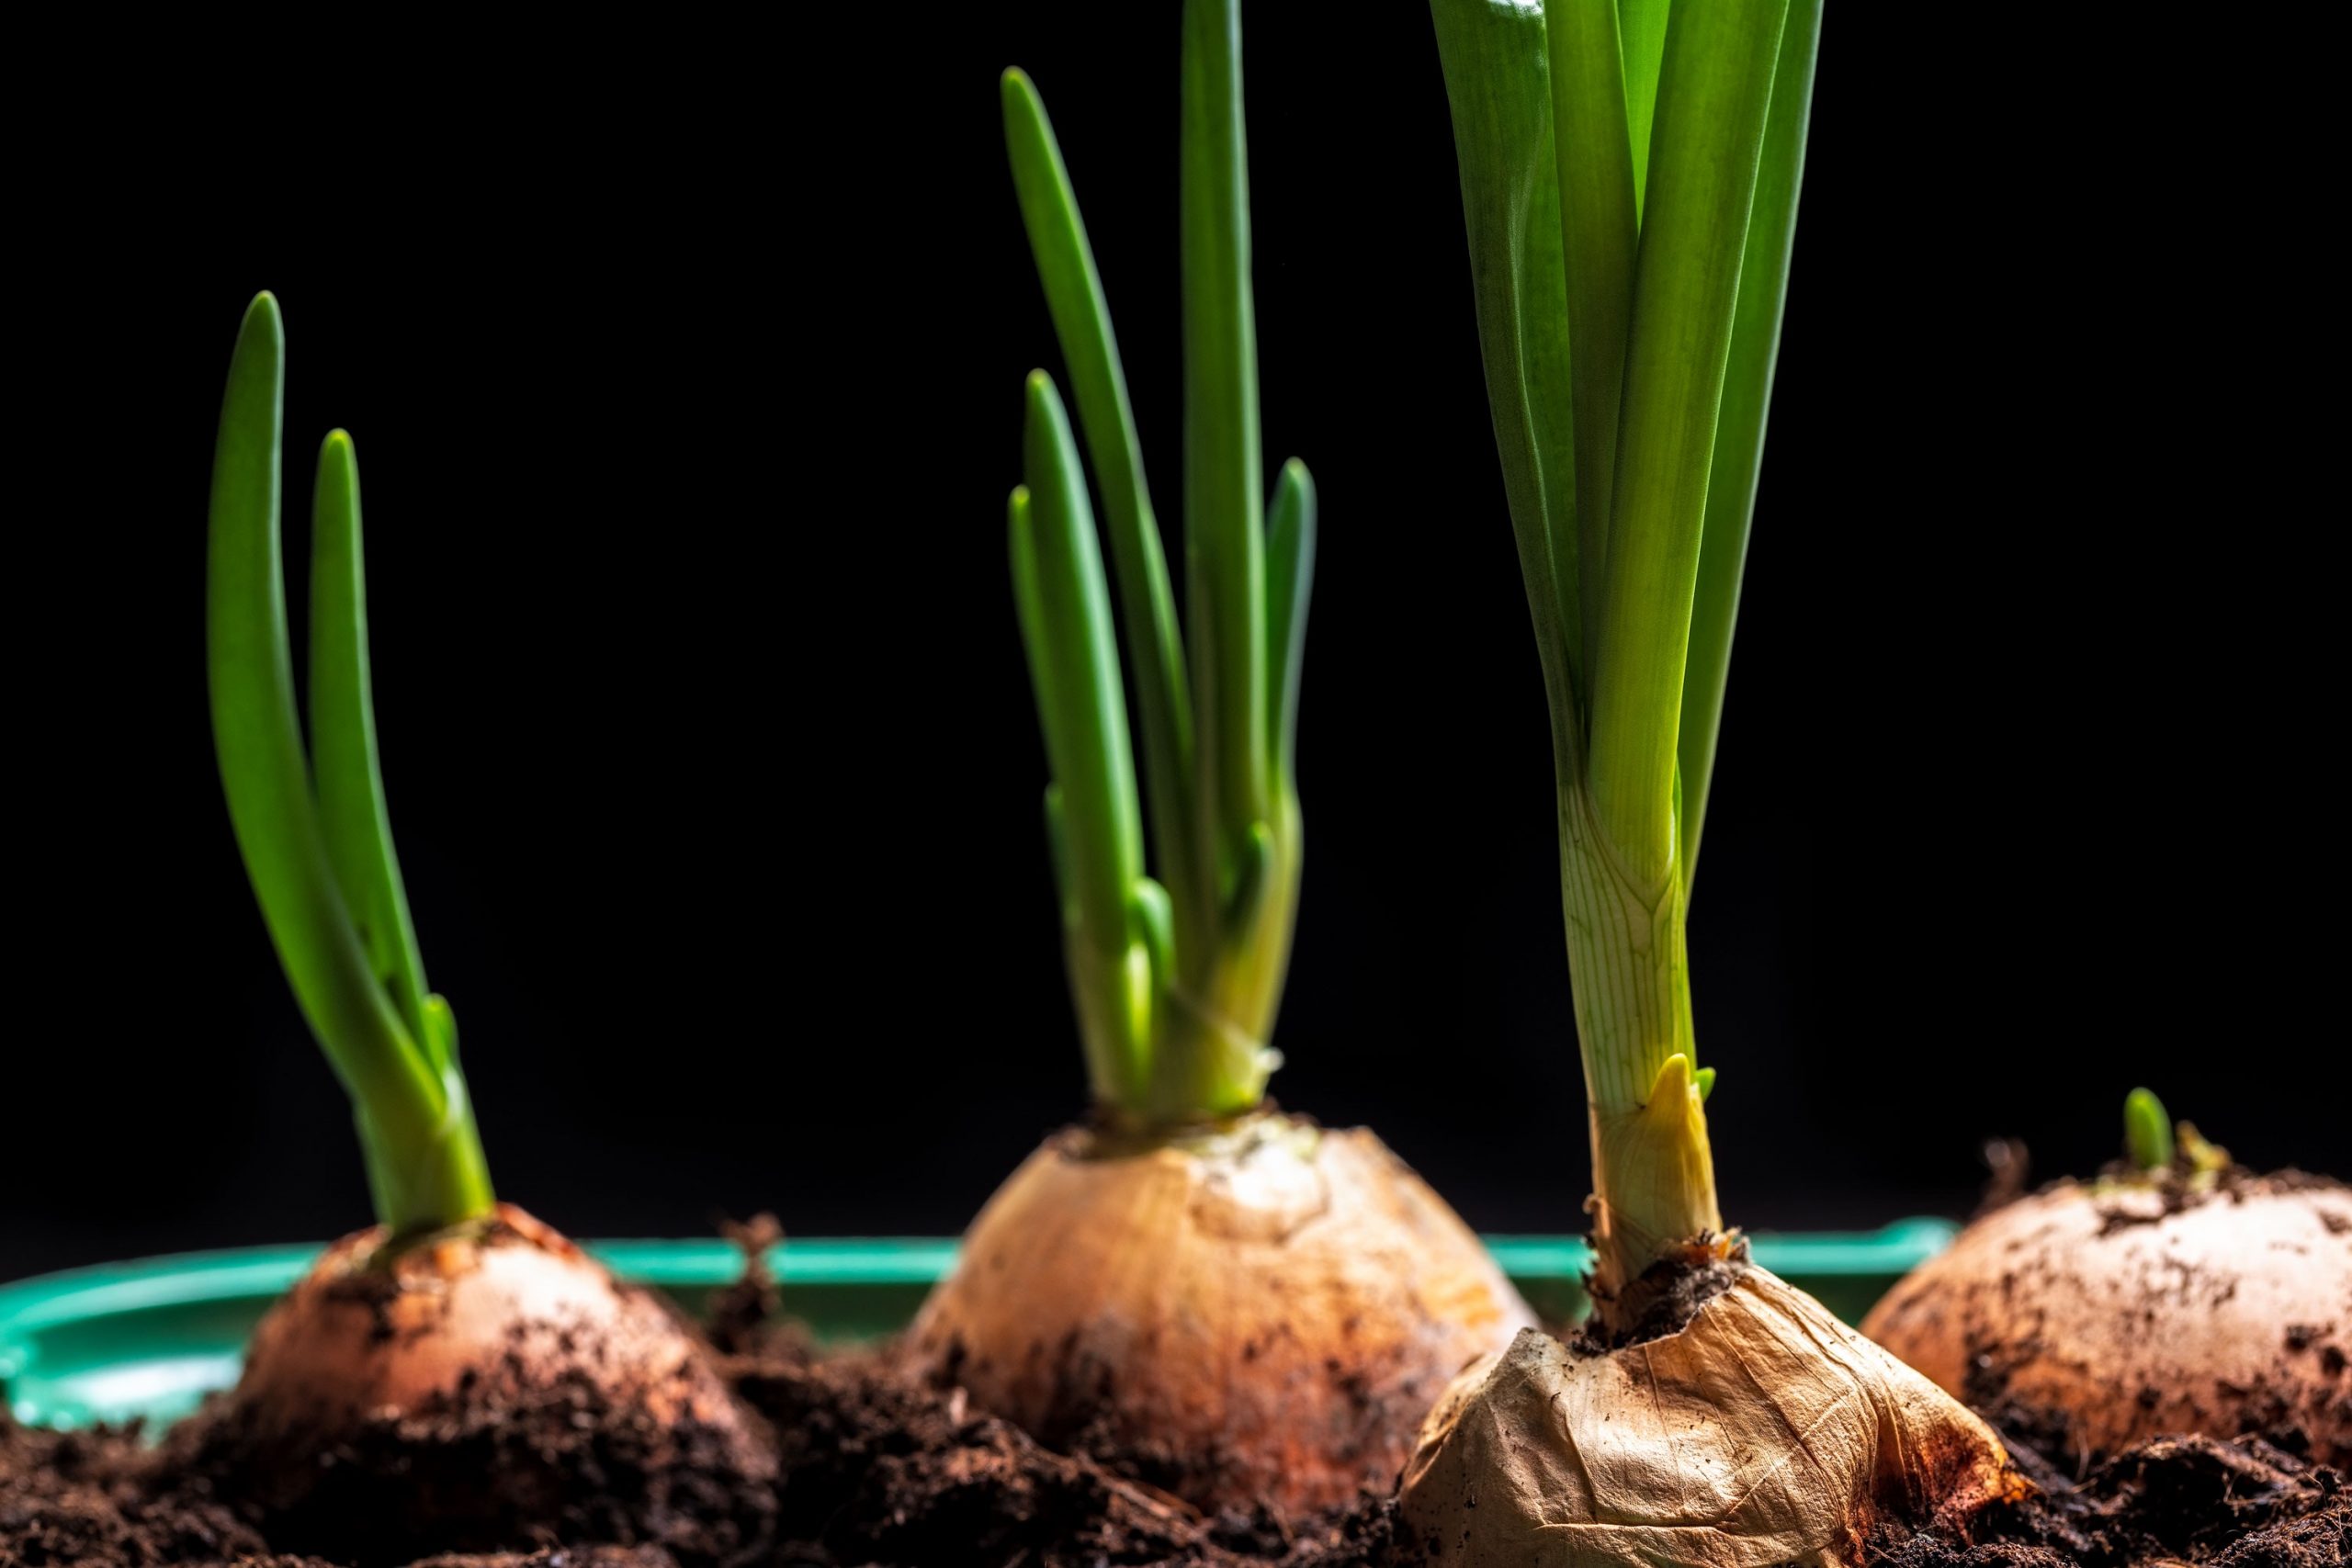 Growing spring onions – what do you need to know?